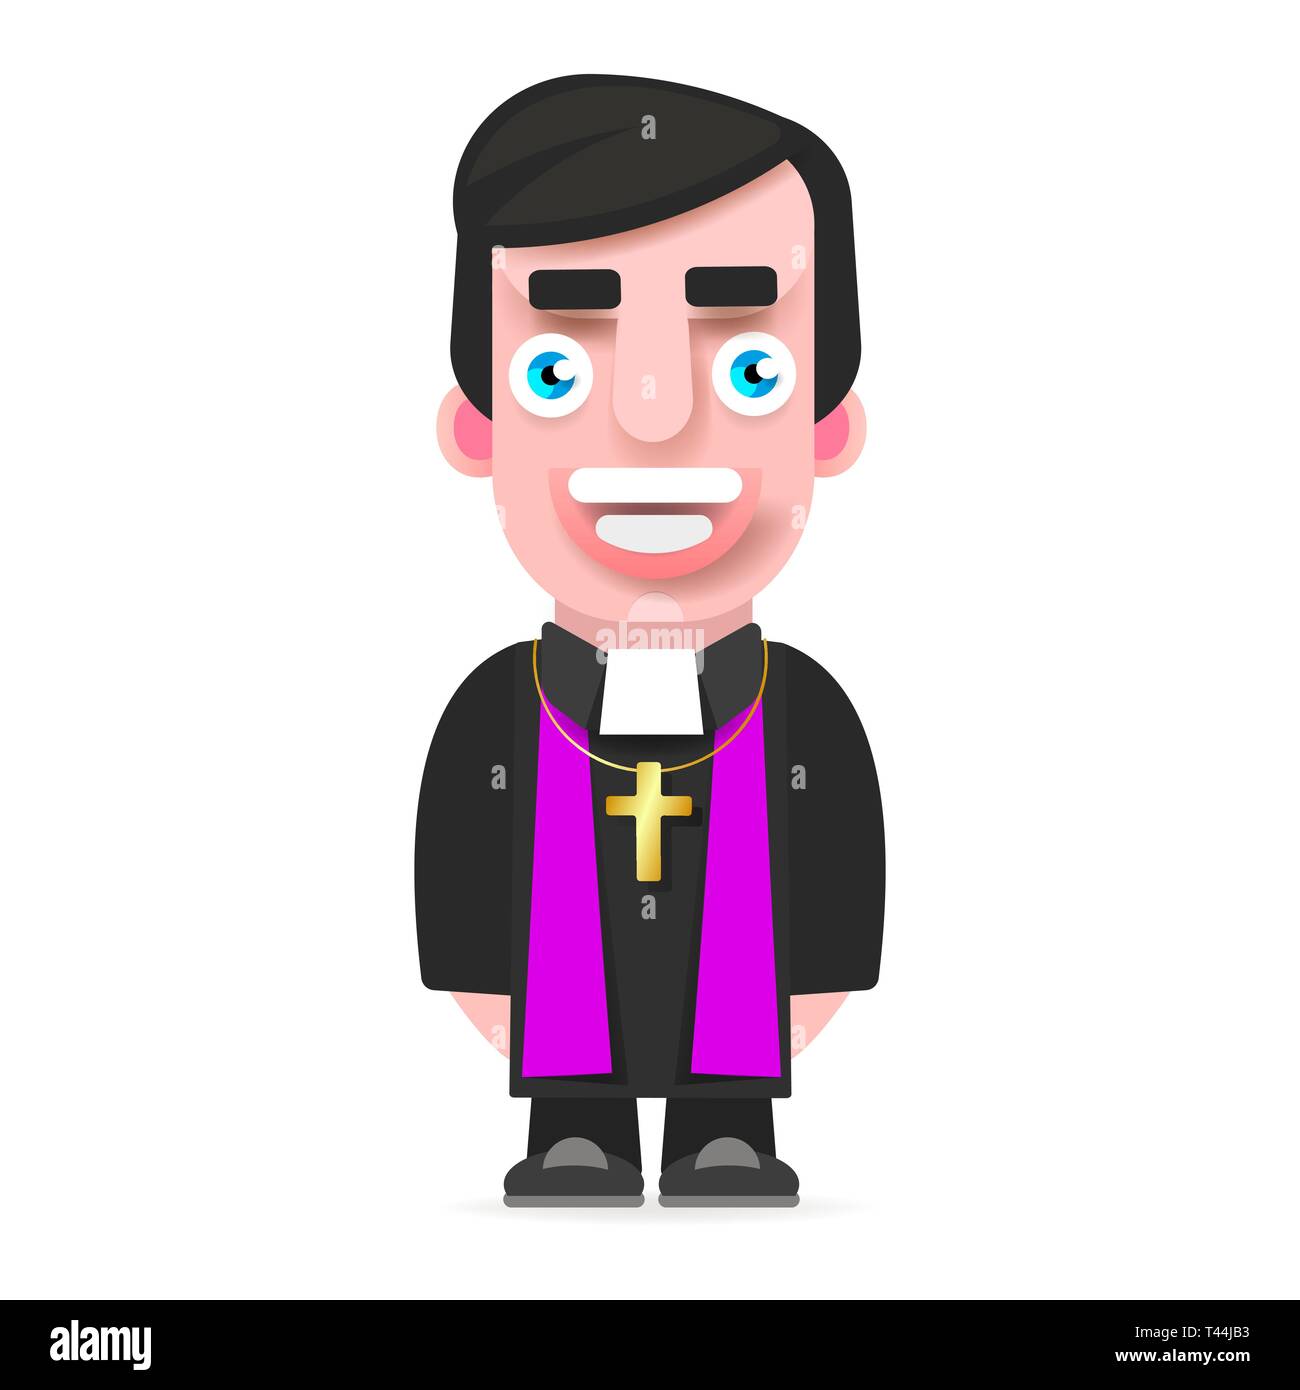 Illustration Of A Priest Icon Flat Design. Cartoon Illustration Of Priest Vector Icon For Web Stock Vector